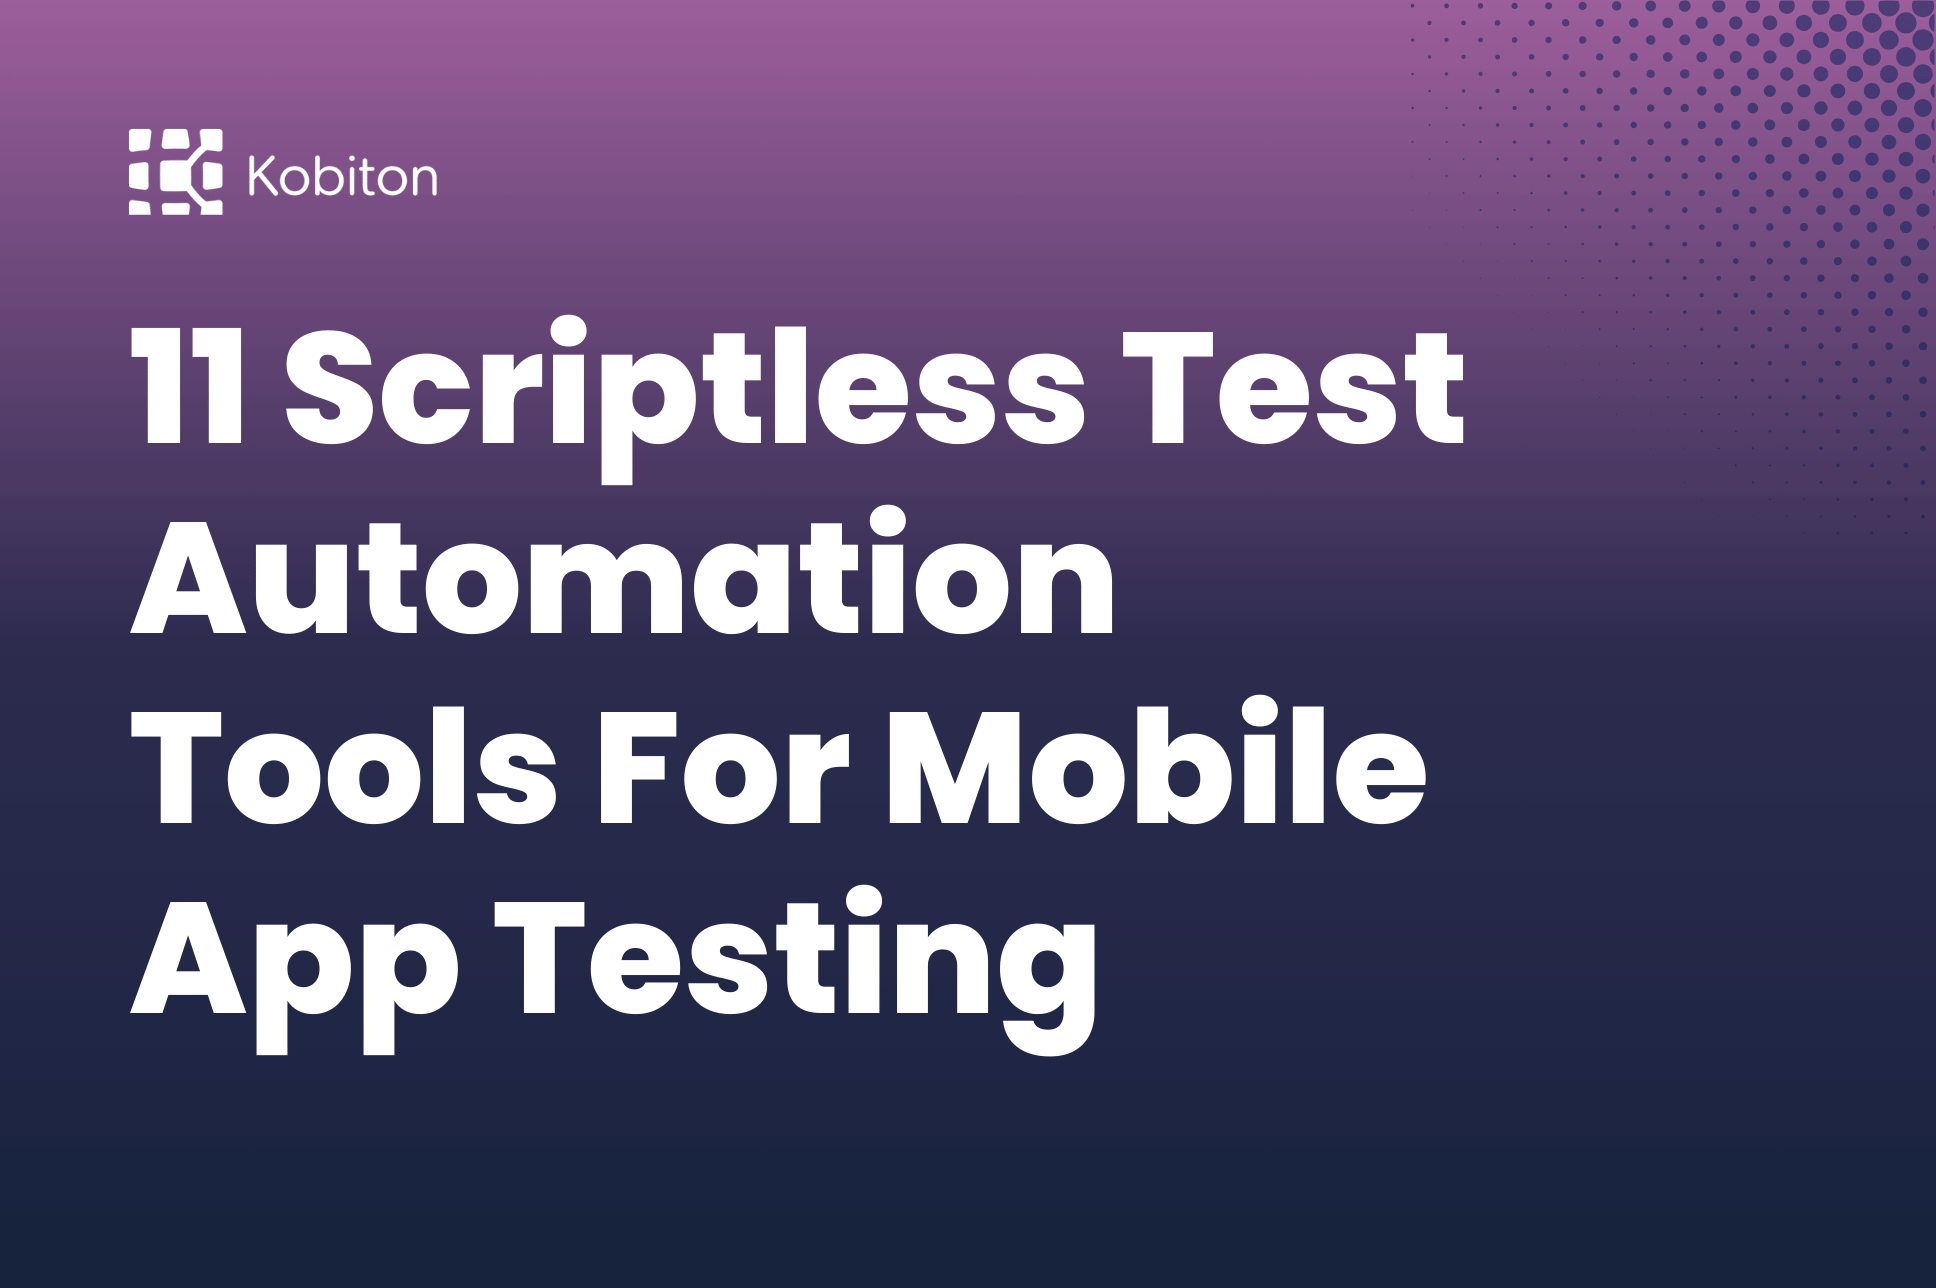 Scriptless Test Automation tools blog image